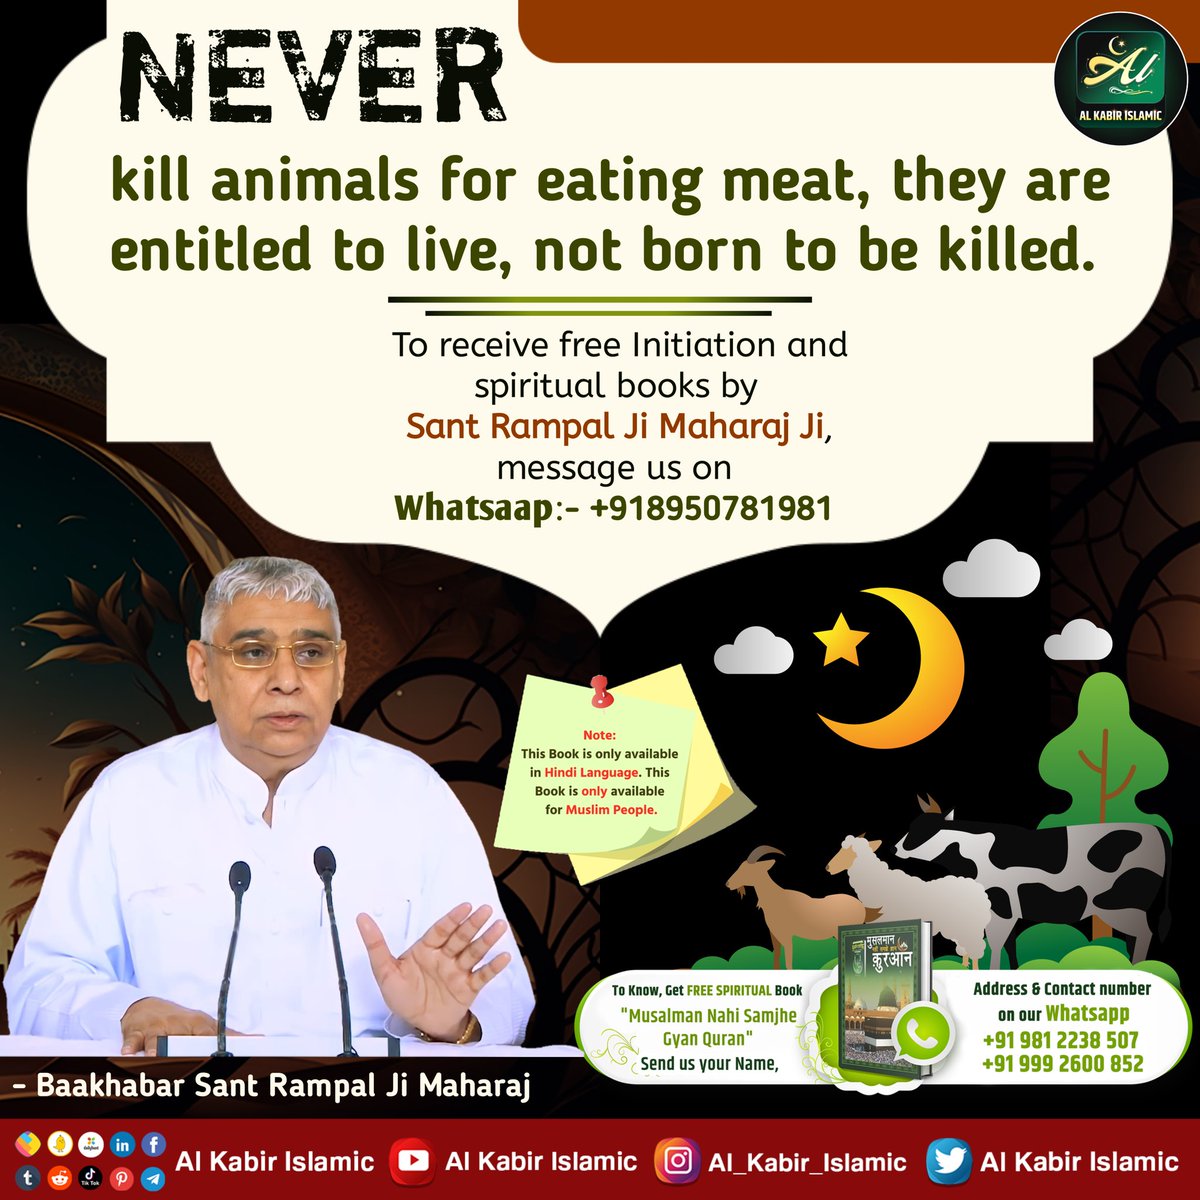 #रहम_करो_मूक_जीवों_पर
This fact is explained by Sant Rampal Ji Maharaj with the help of spiritual texts. He proves that Allah Kabir/God Kabir never ordered anyone to eat meat.